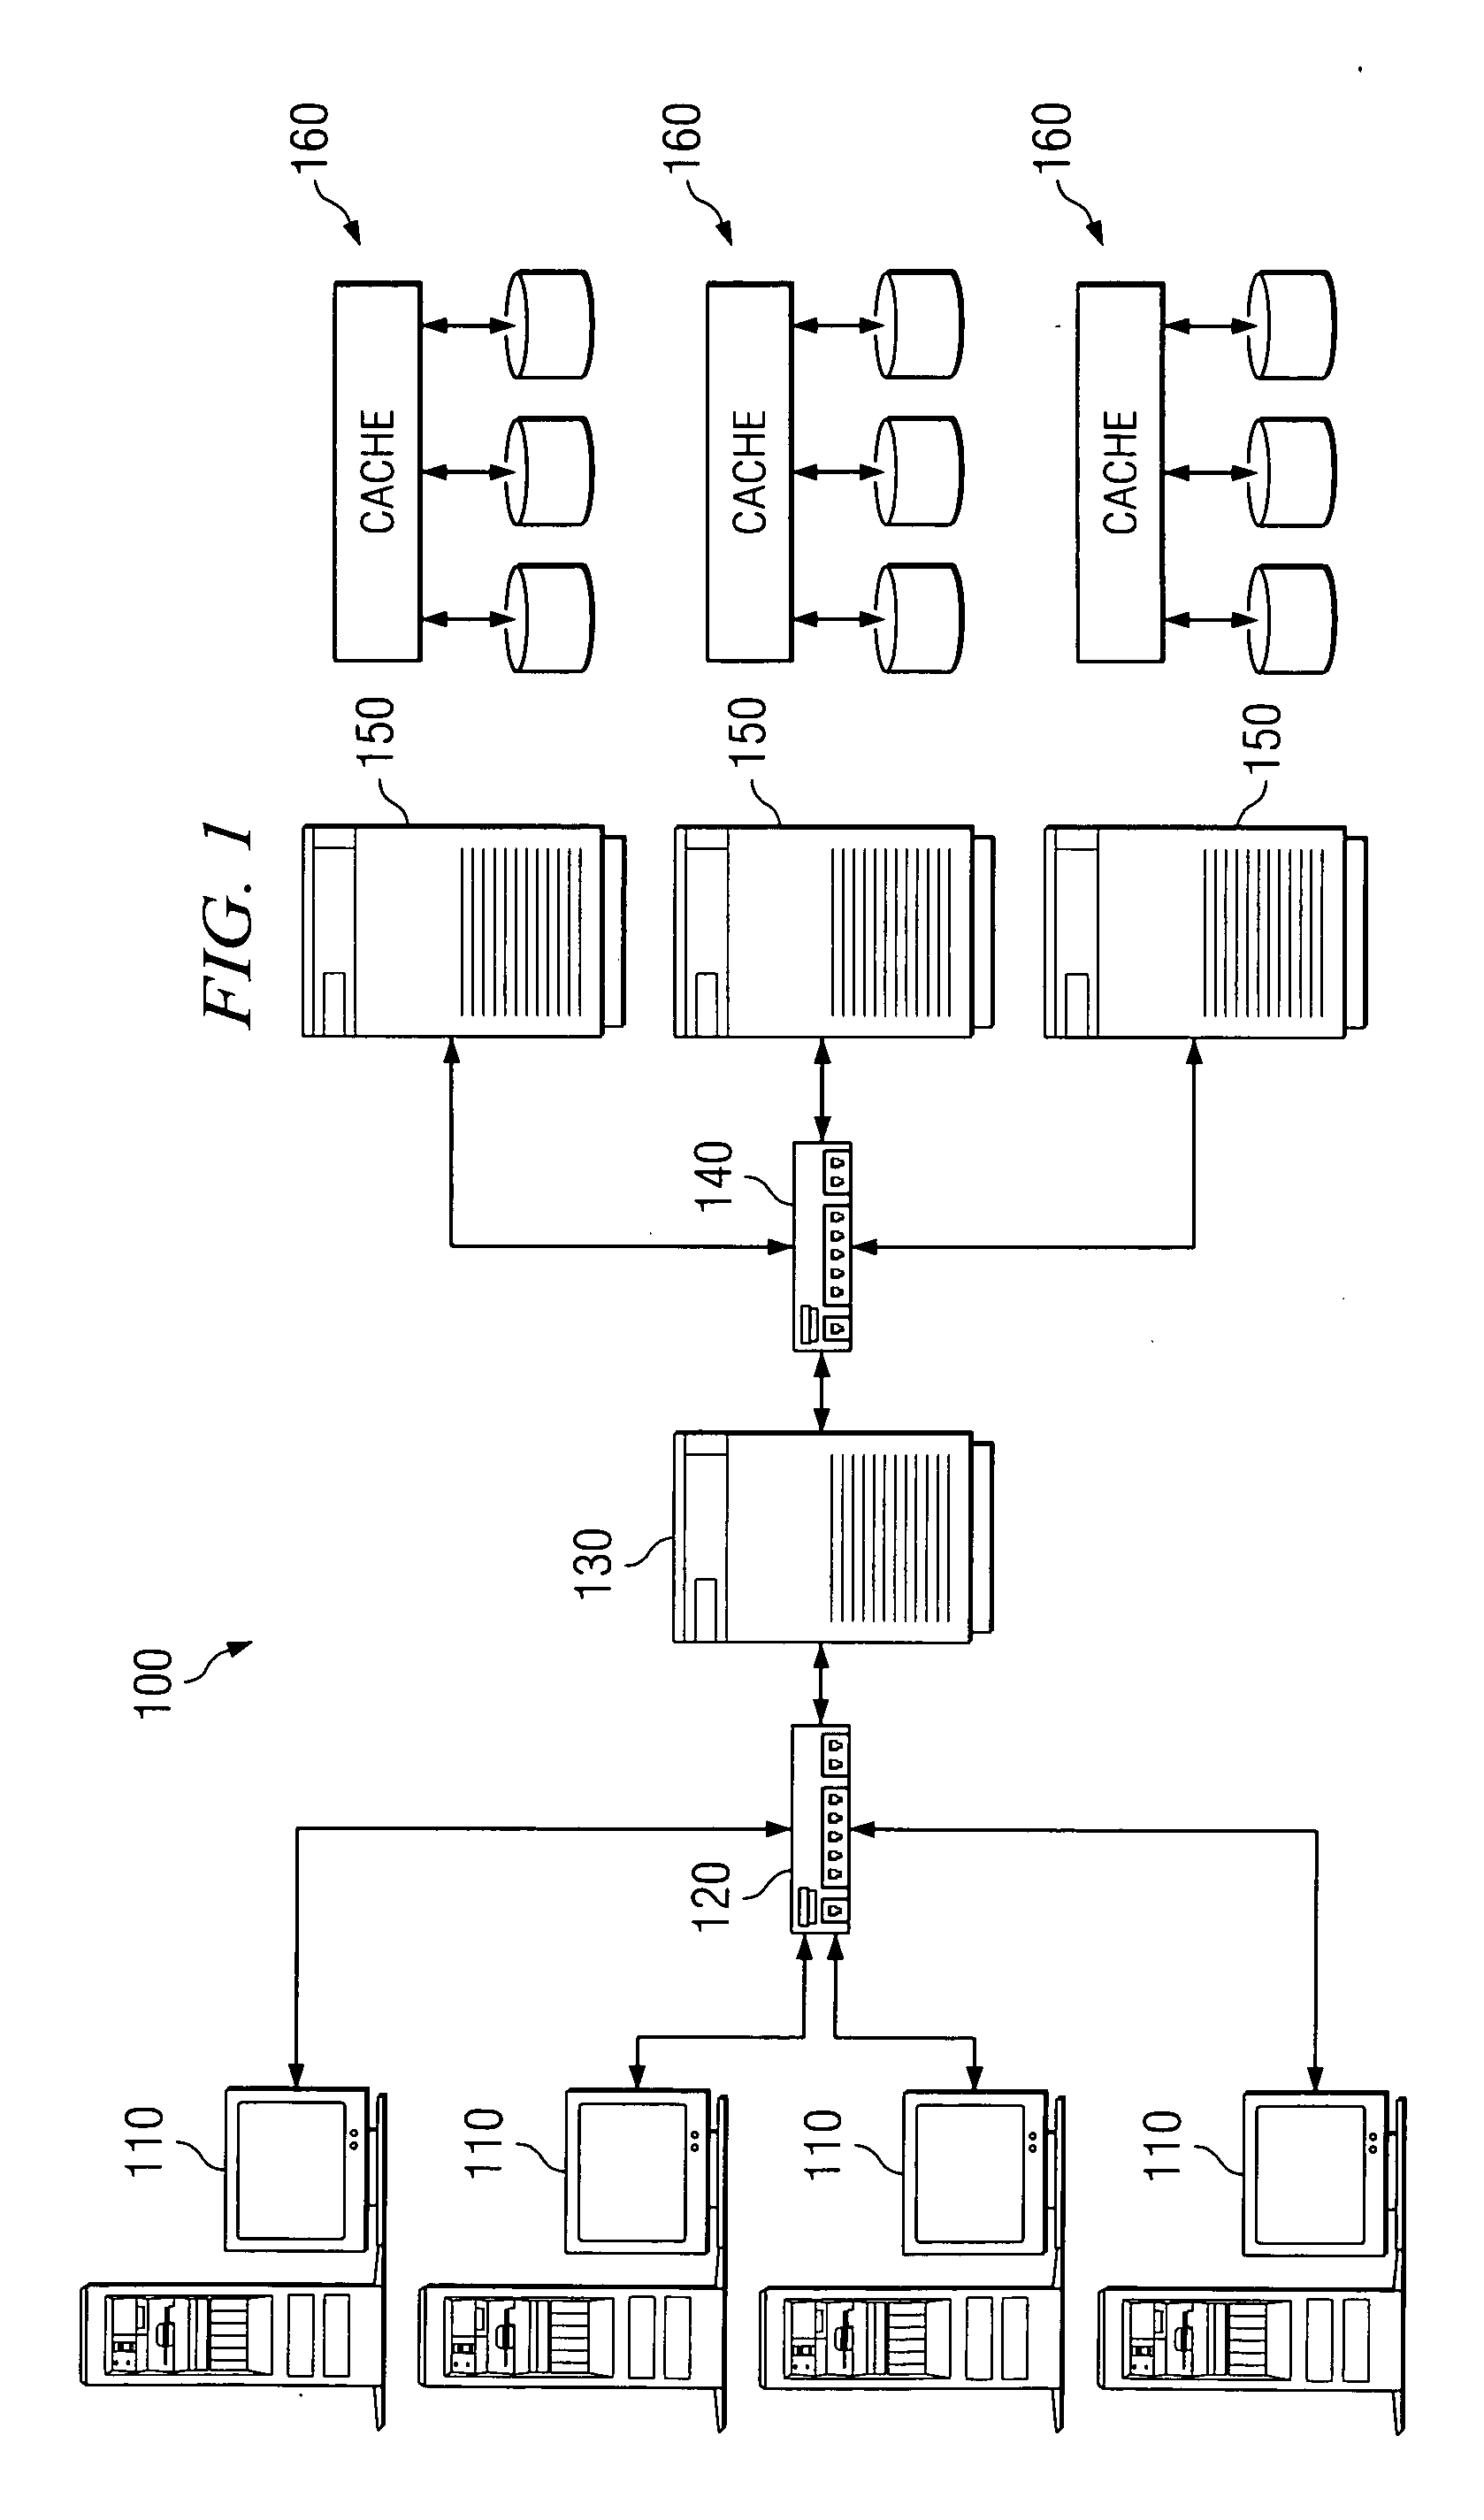 System and method for path saturation for computer storage performance analysis